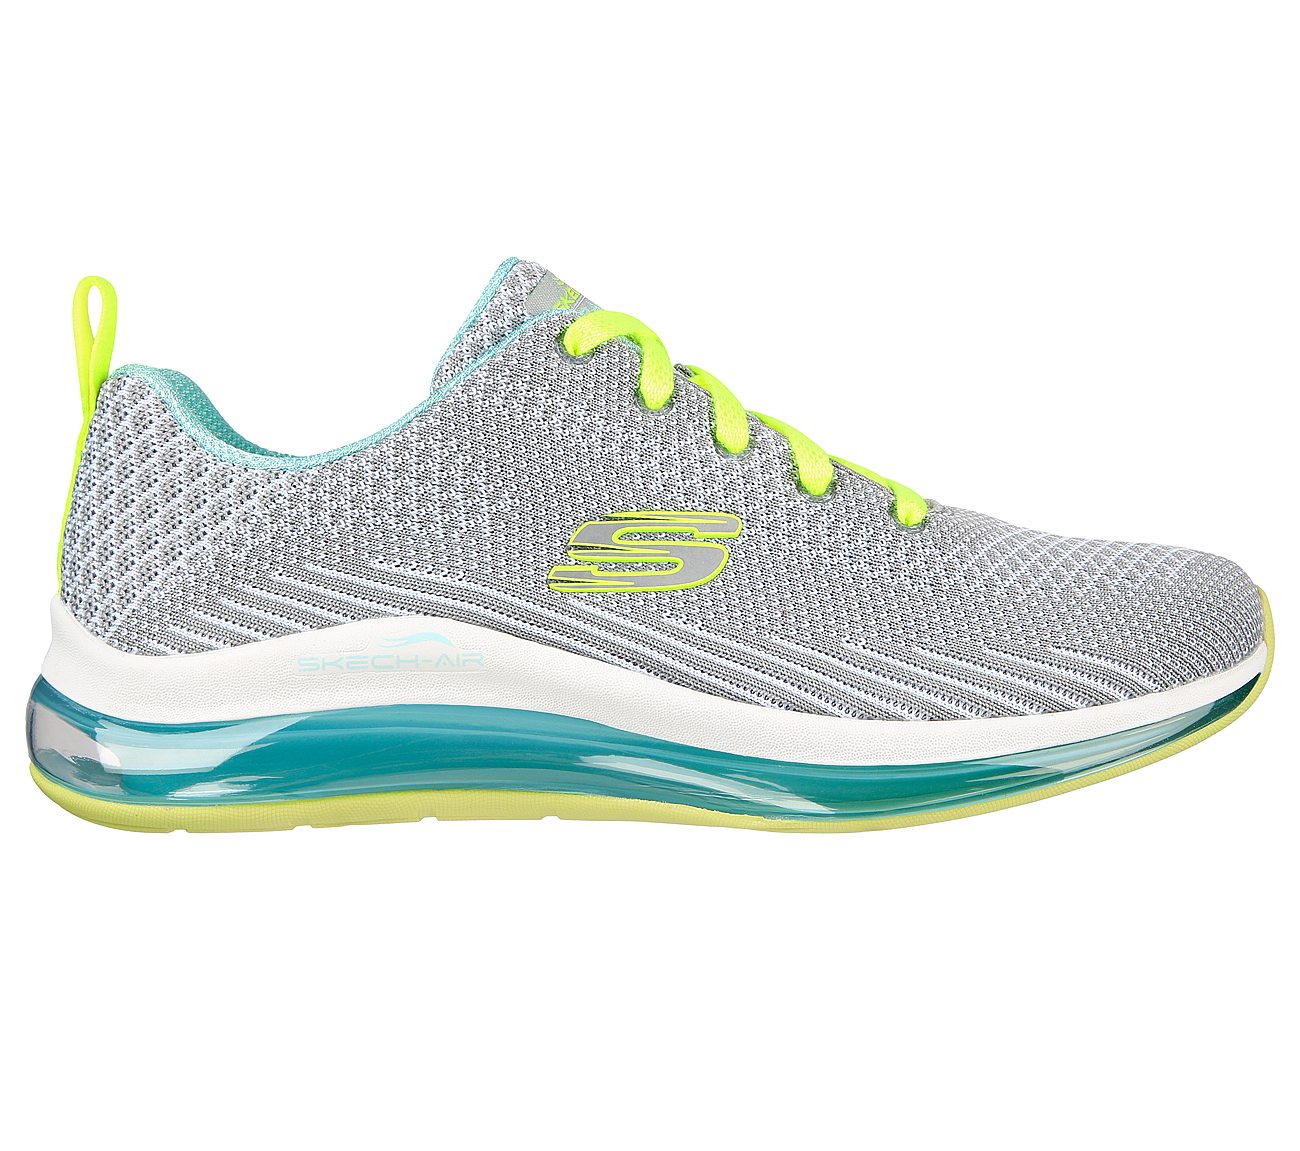 SKECH-AIR ELEMENT 2.0-AMUSE M, GREY/YELLOW/BLUE Footwear Lateral View